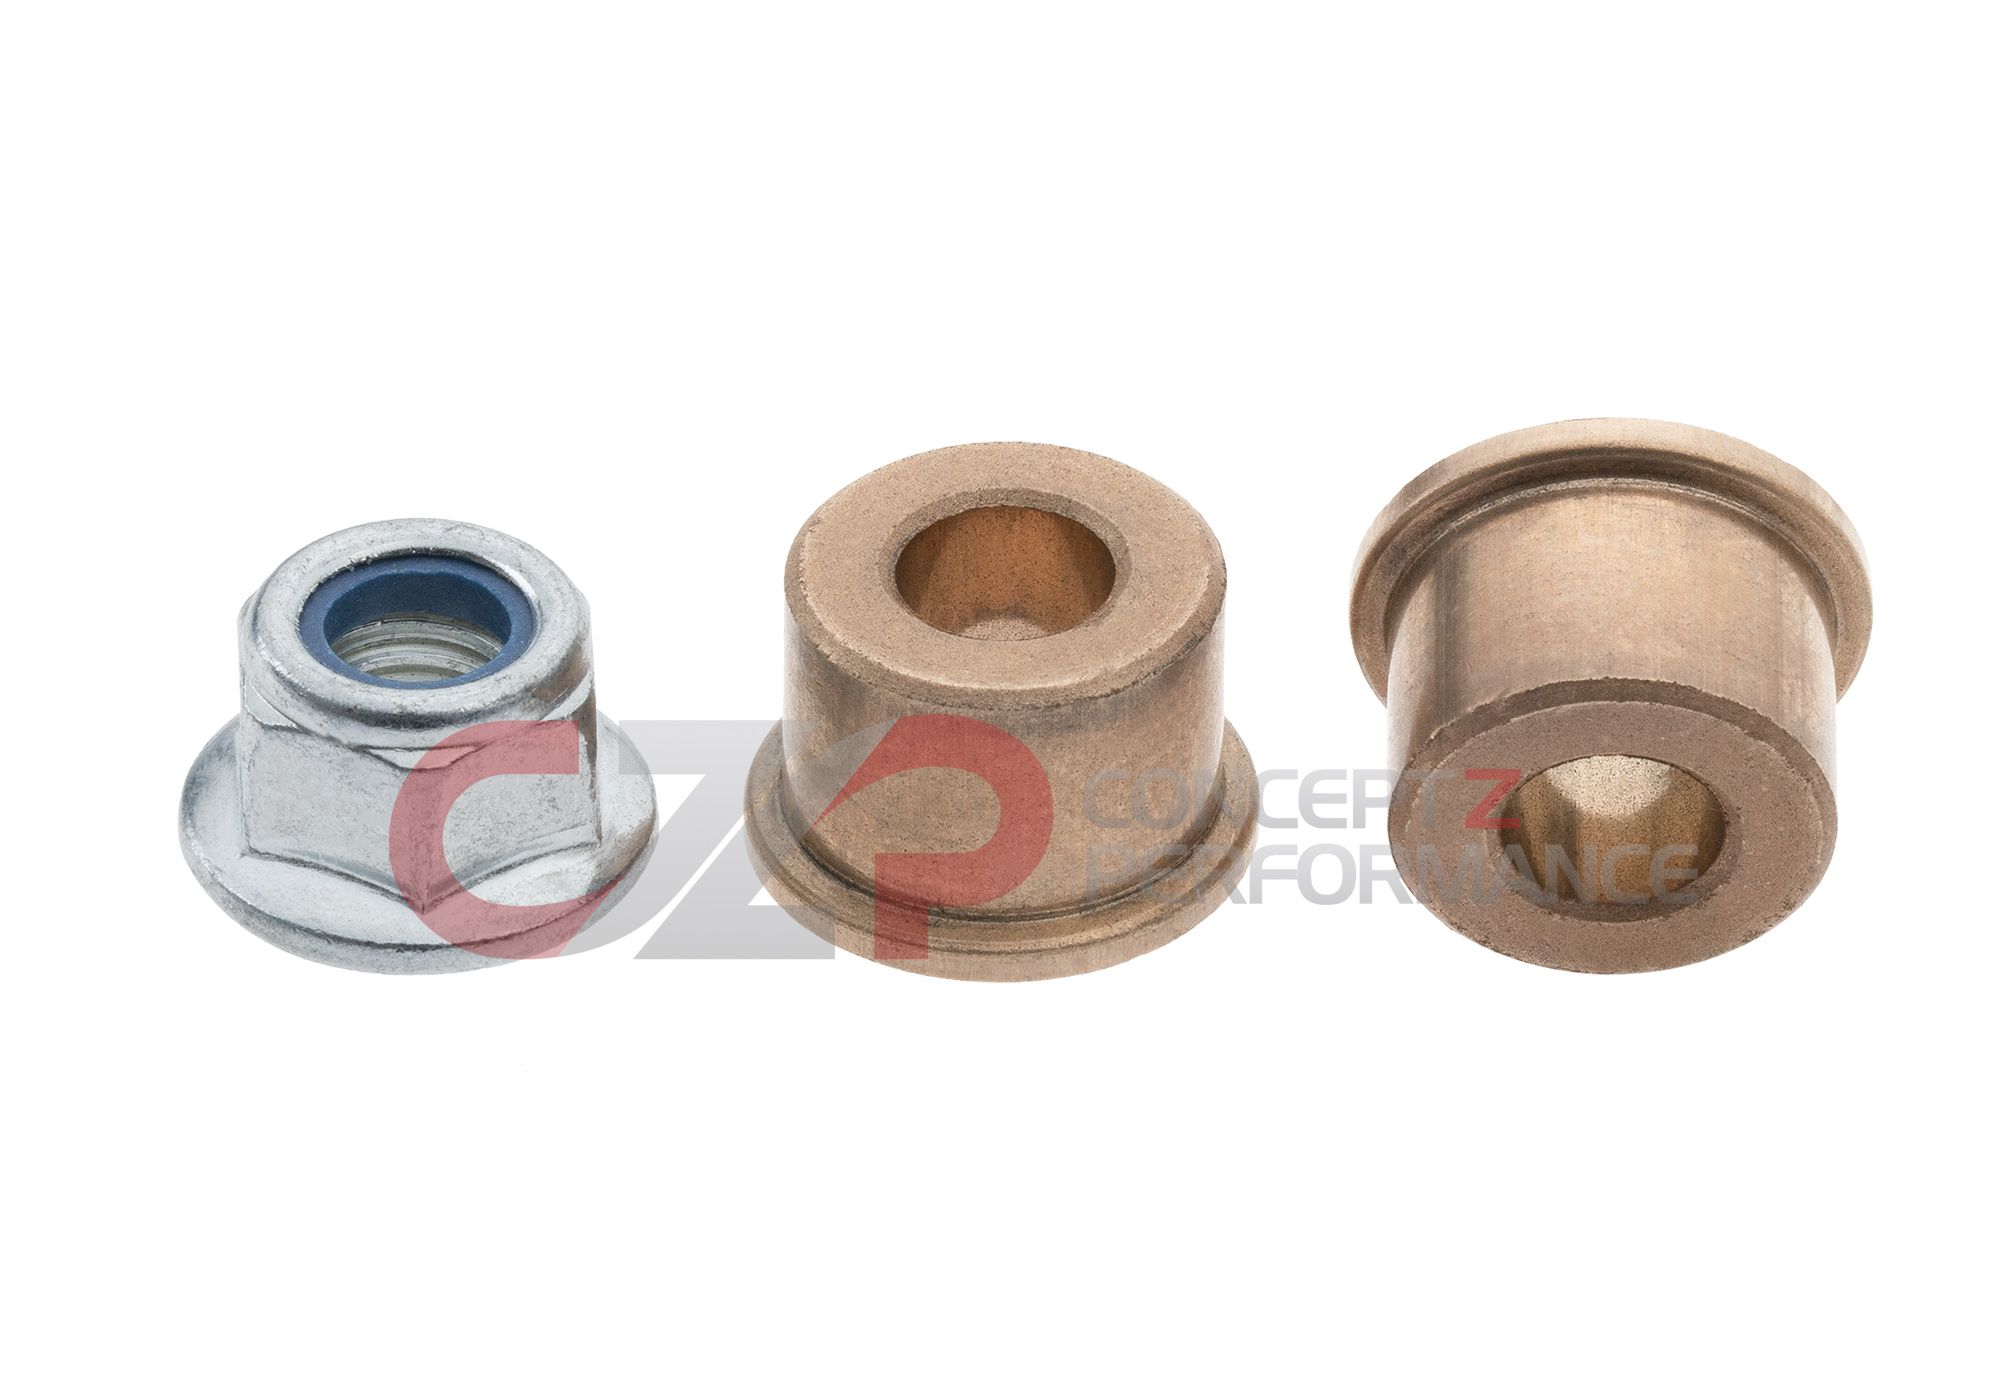 CZP Sintered Bronze Oil Impregnated Solid Shifter Bushings - Nissan 300ZX Z32